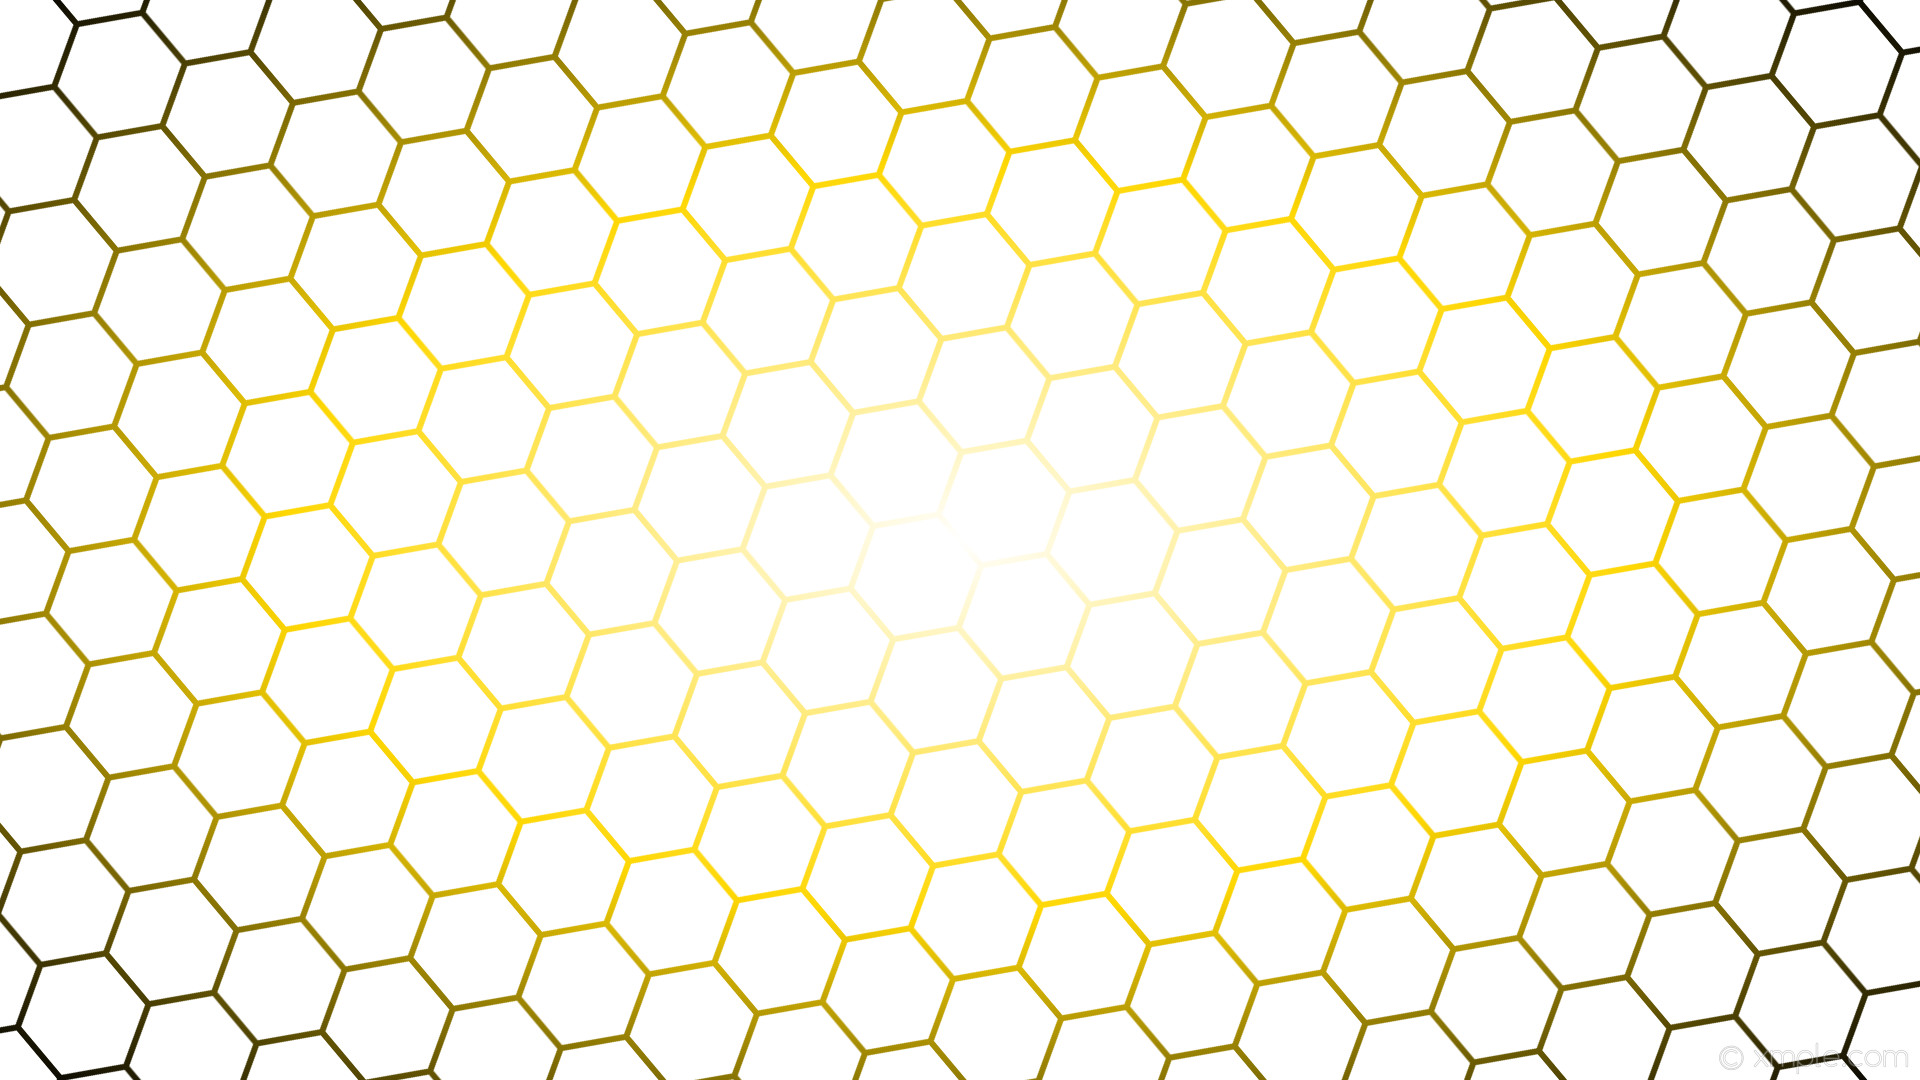 white and gold wallpaper,pattern,yellow,line,design,honeycomb